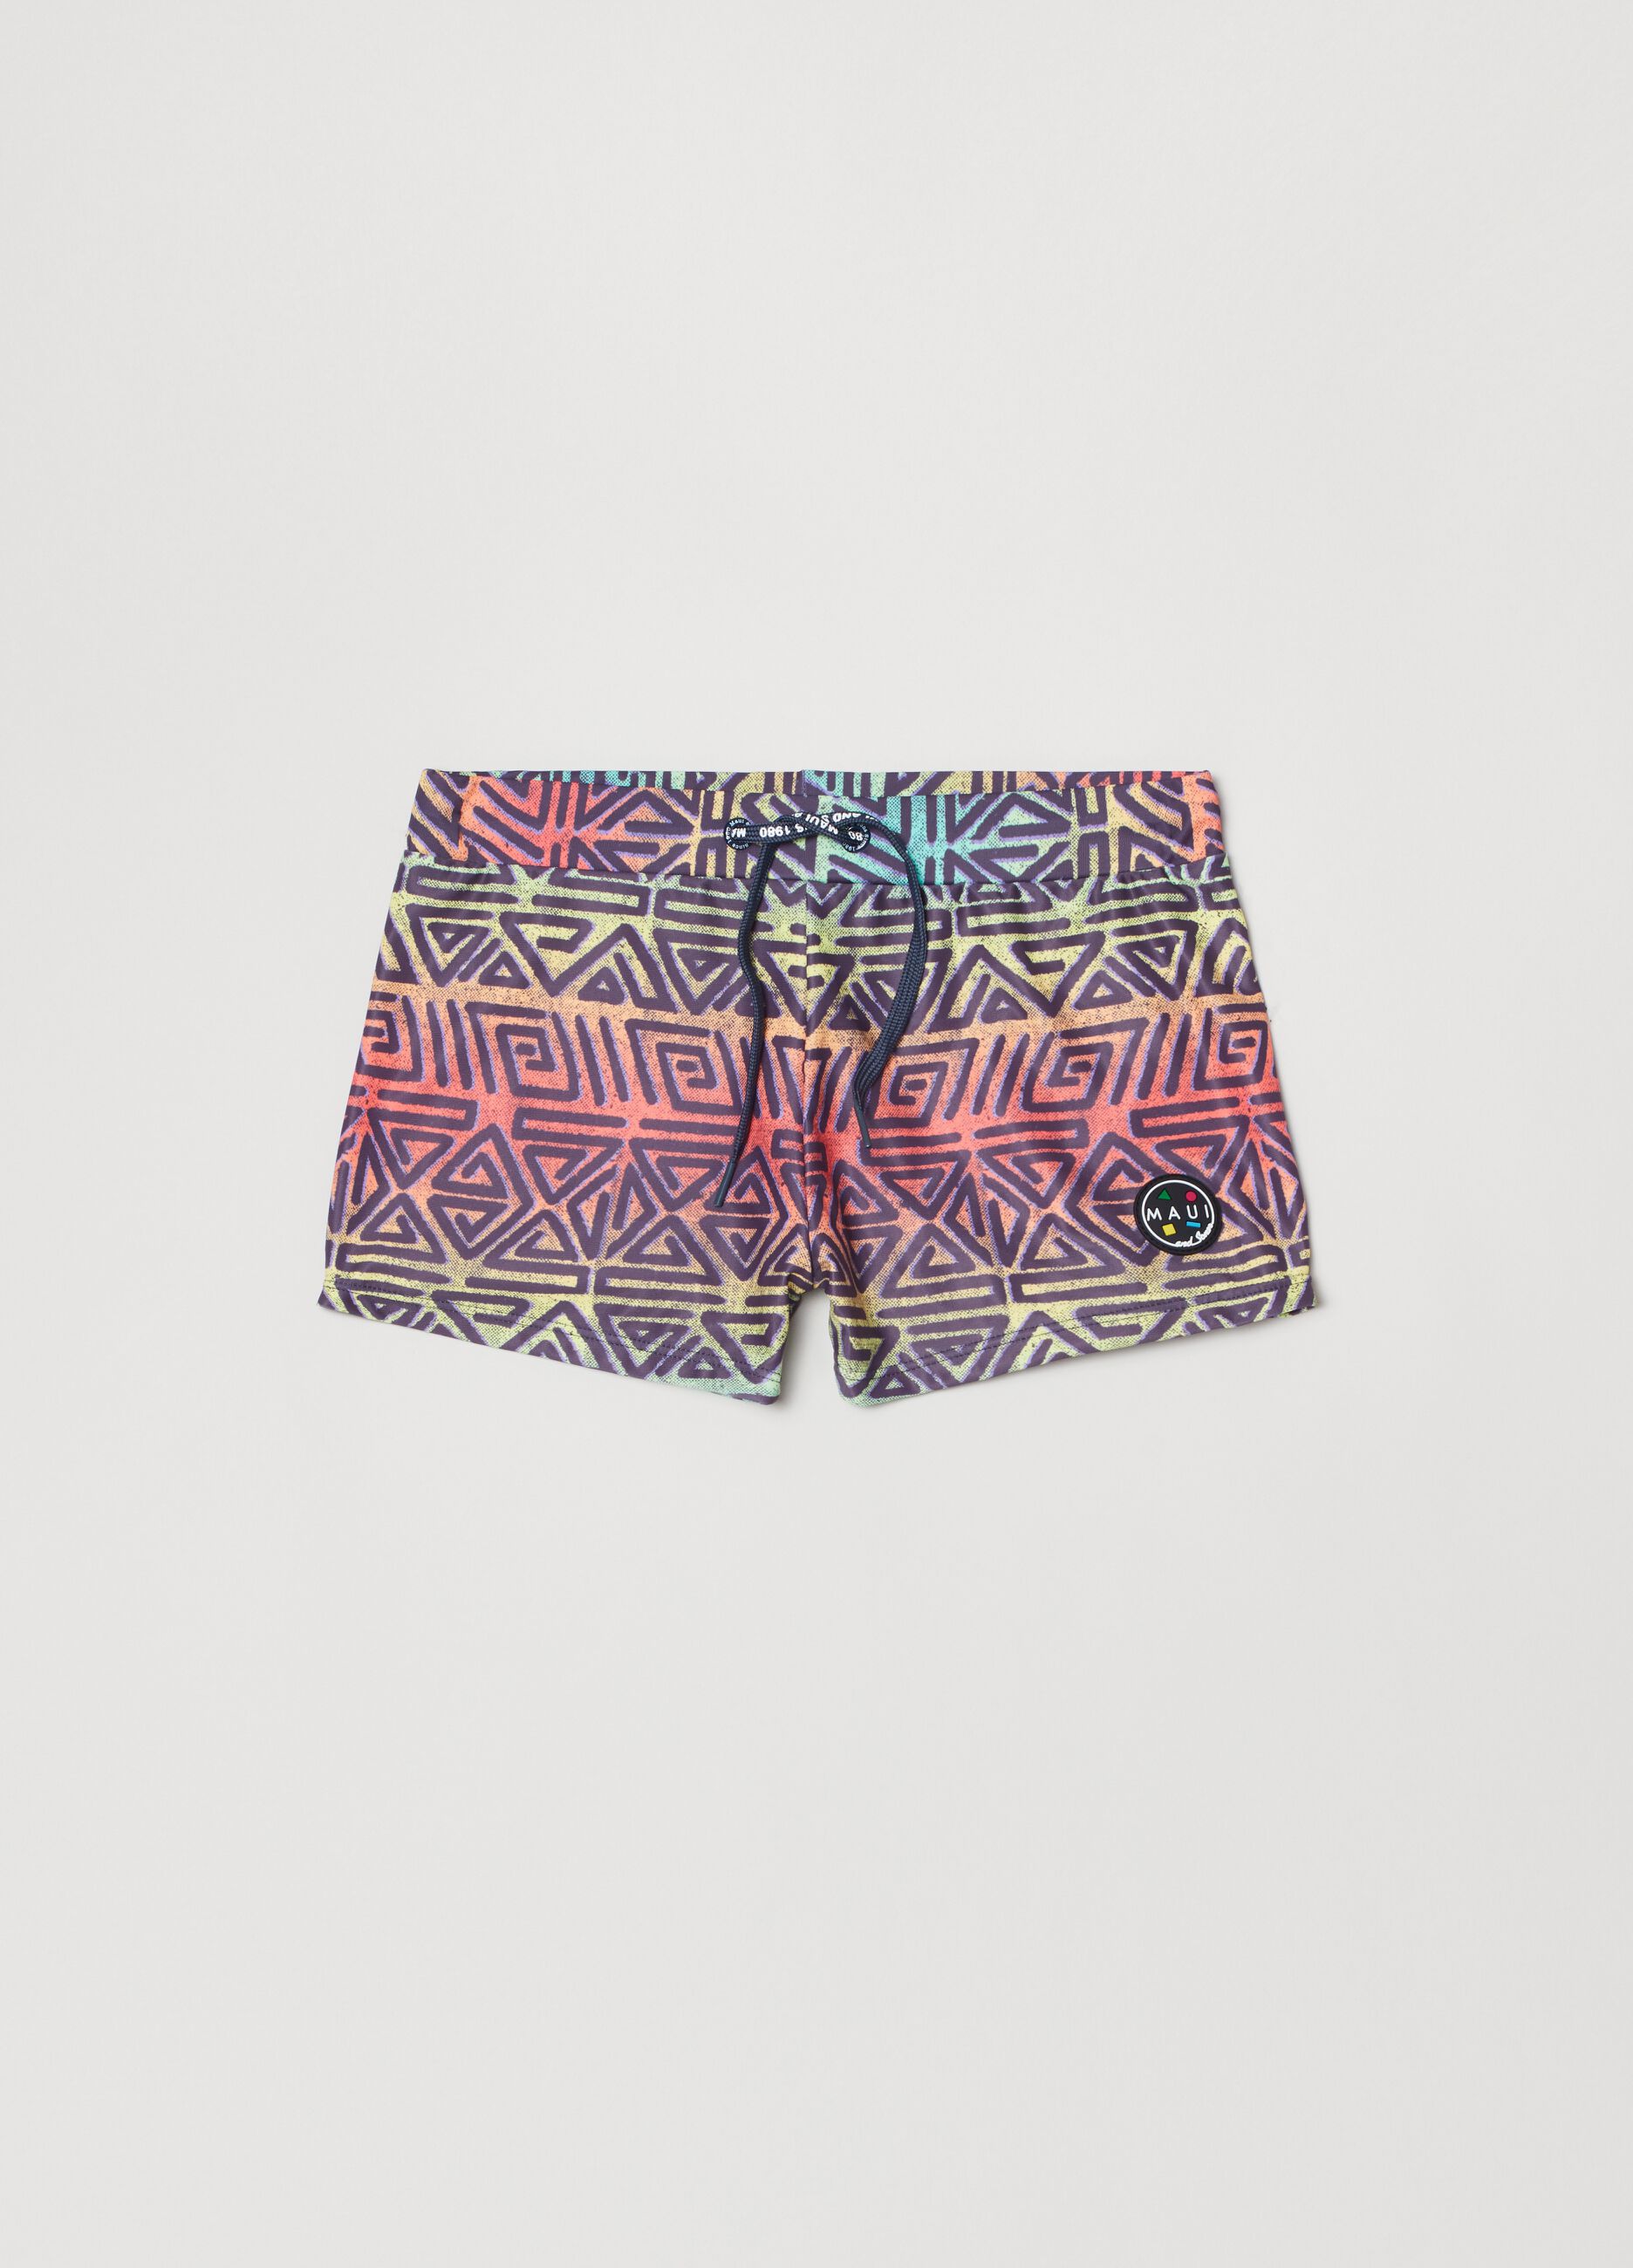 Maui and Sons swimming trunks with print